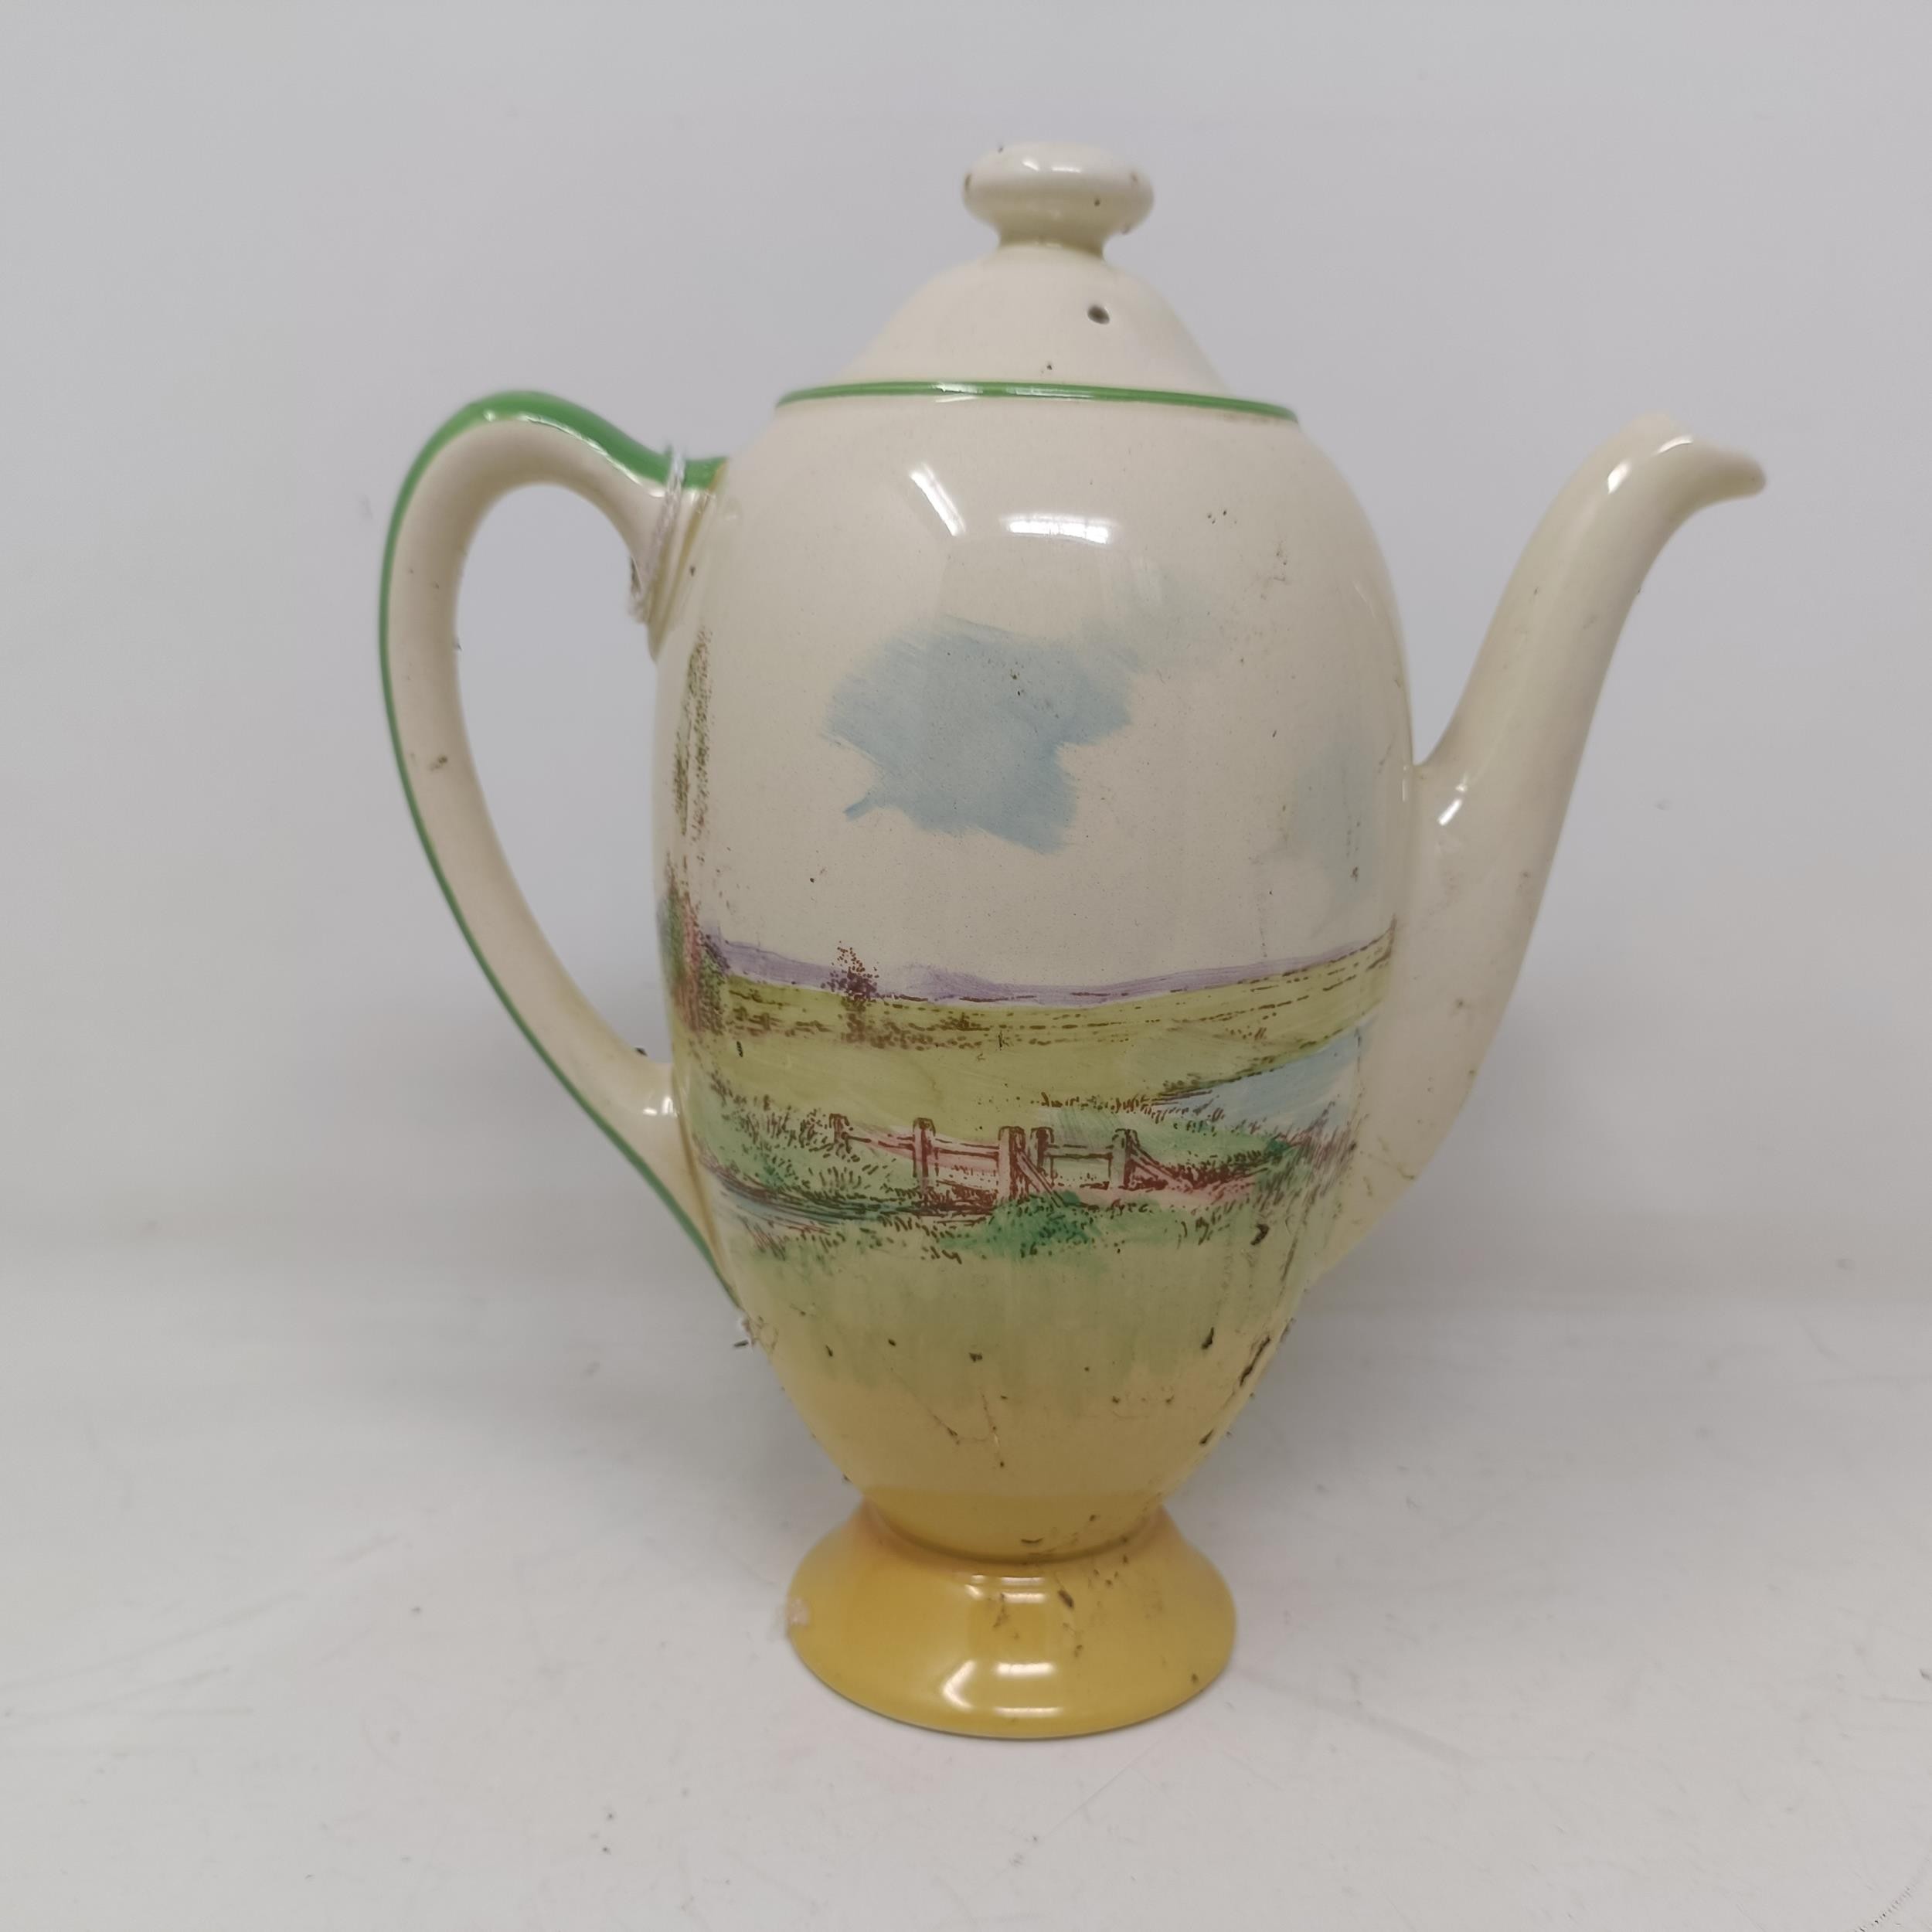 A Royal Doulton Dickens Ware musical jug, The Gaffers Story, 20 cm high, a coffee pot, decorated - Image 22 of 28